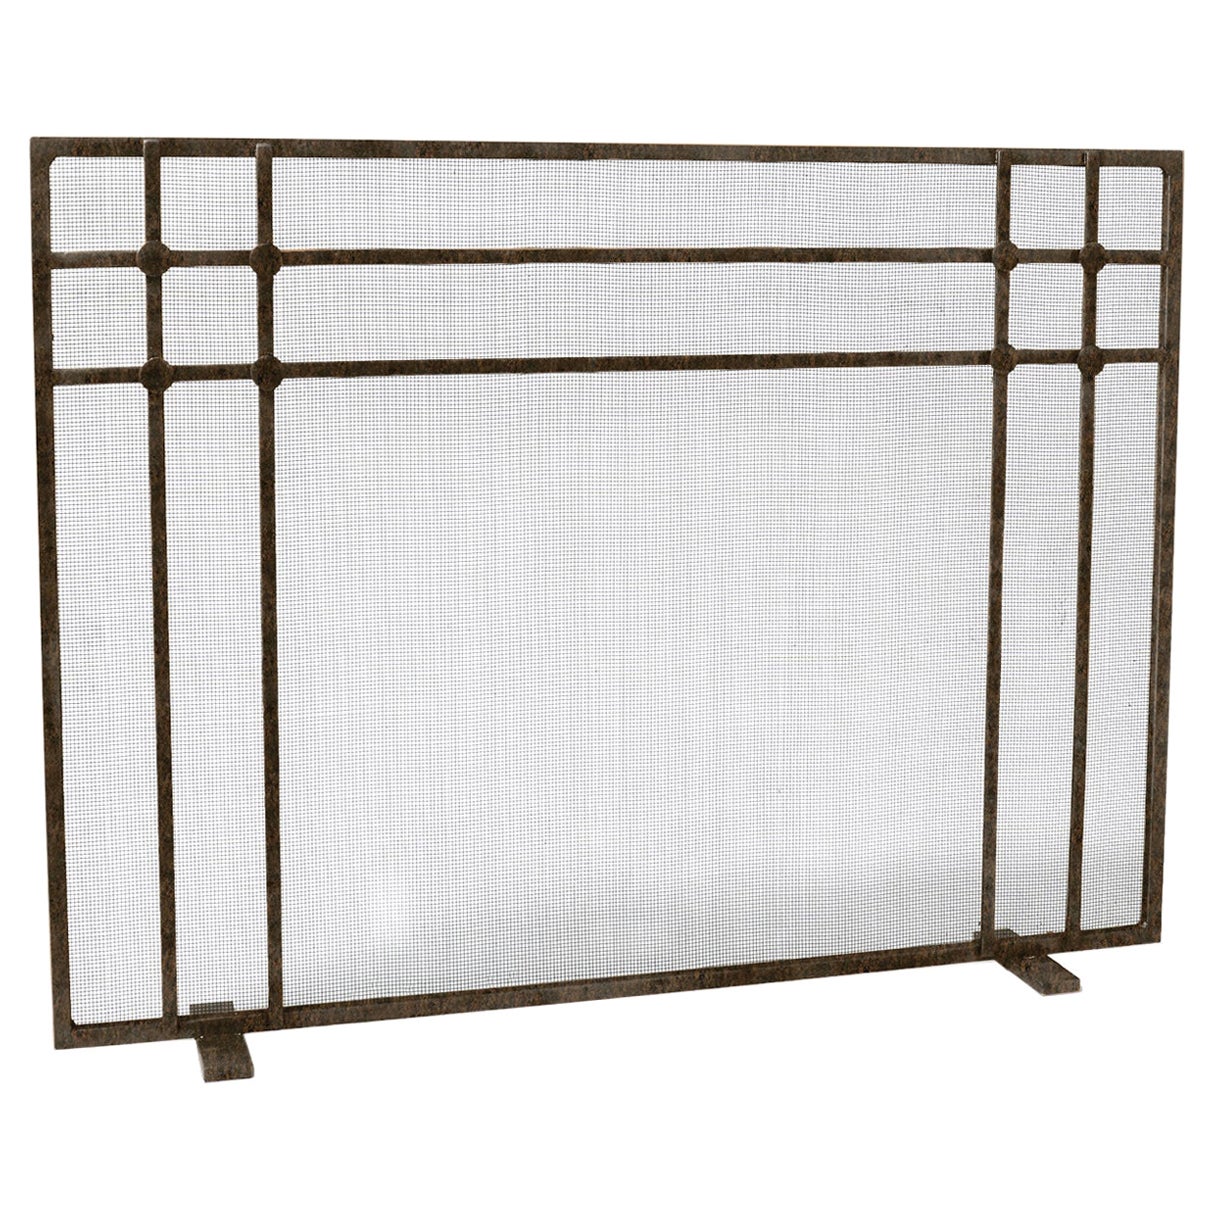 Henry Fireplace Screen in Warm Black For Sale